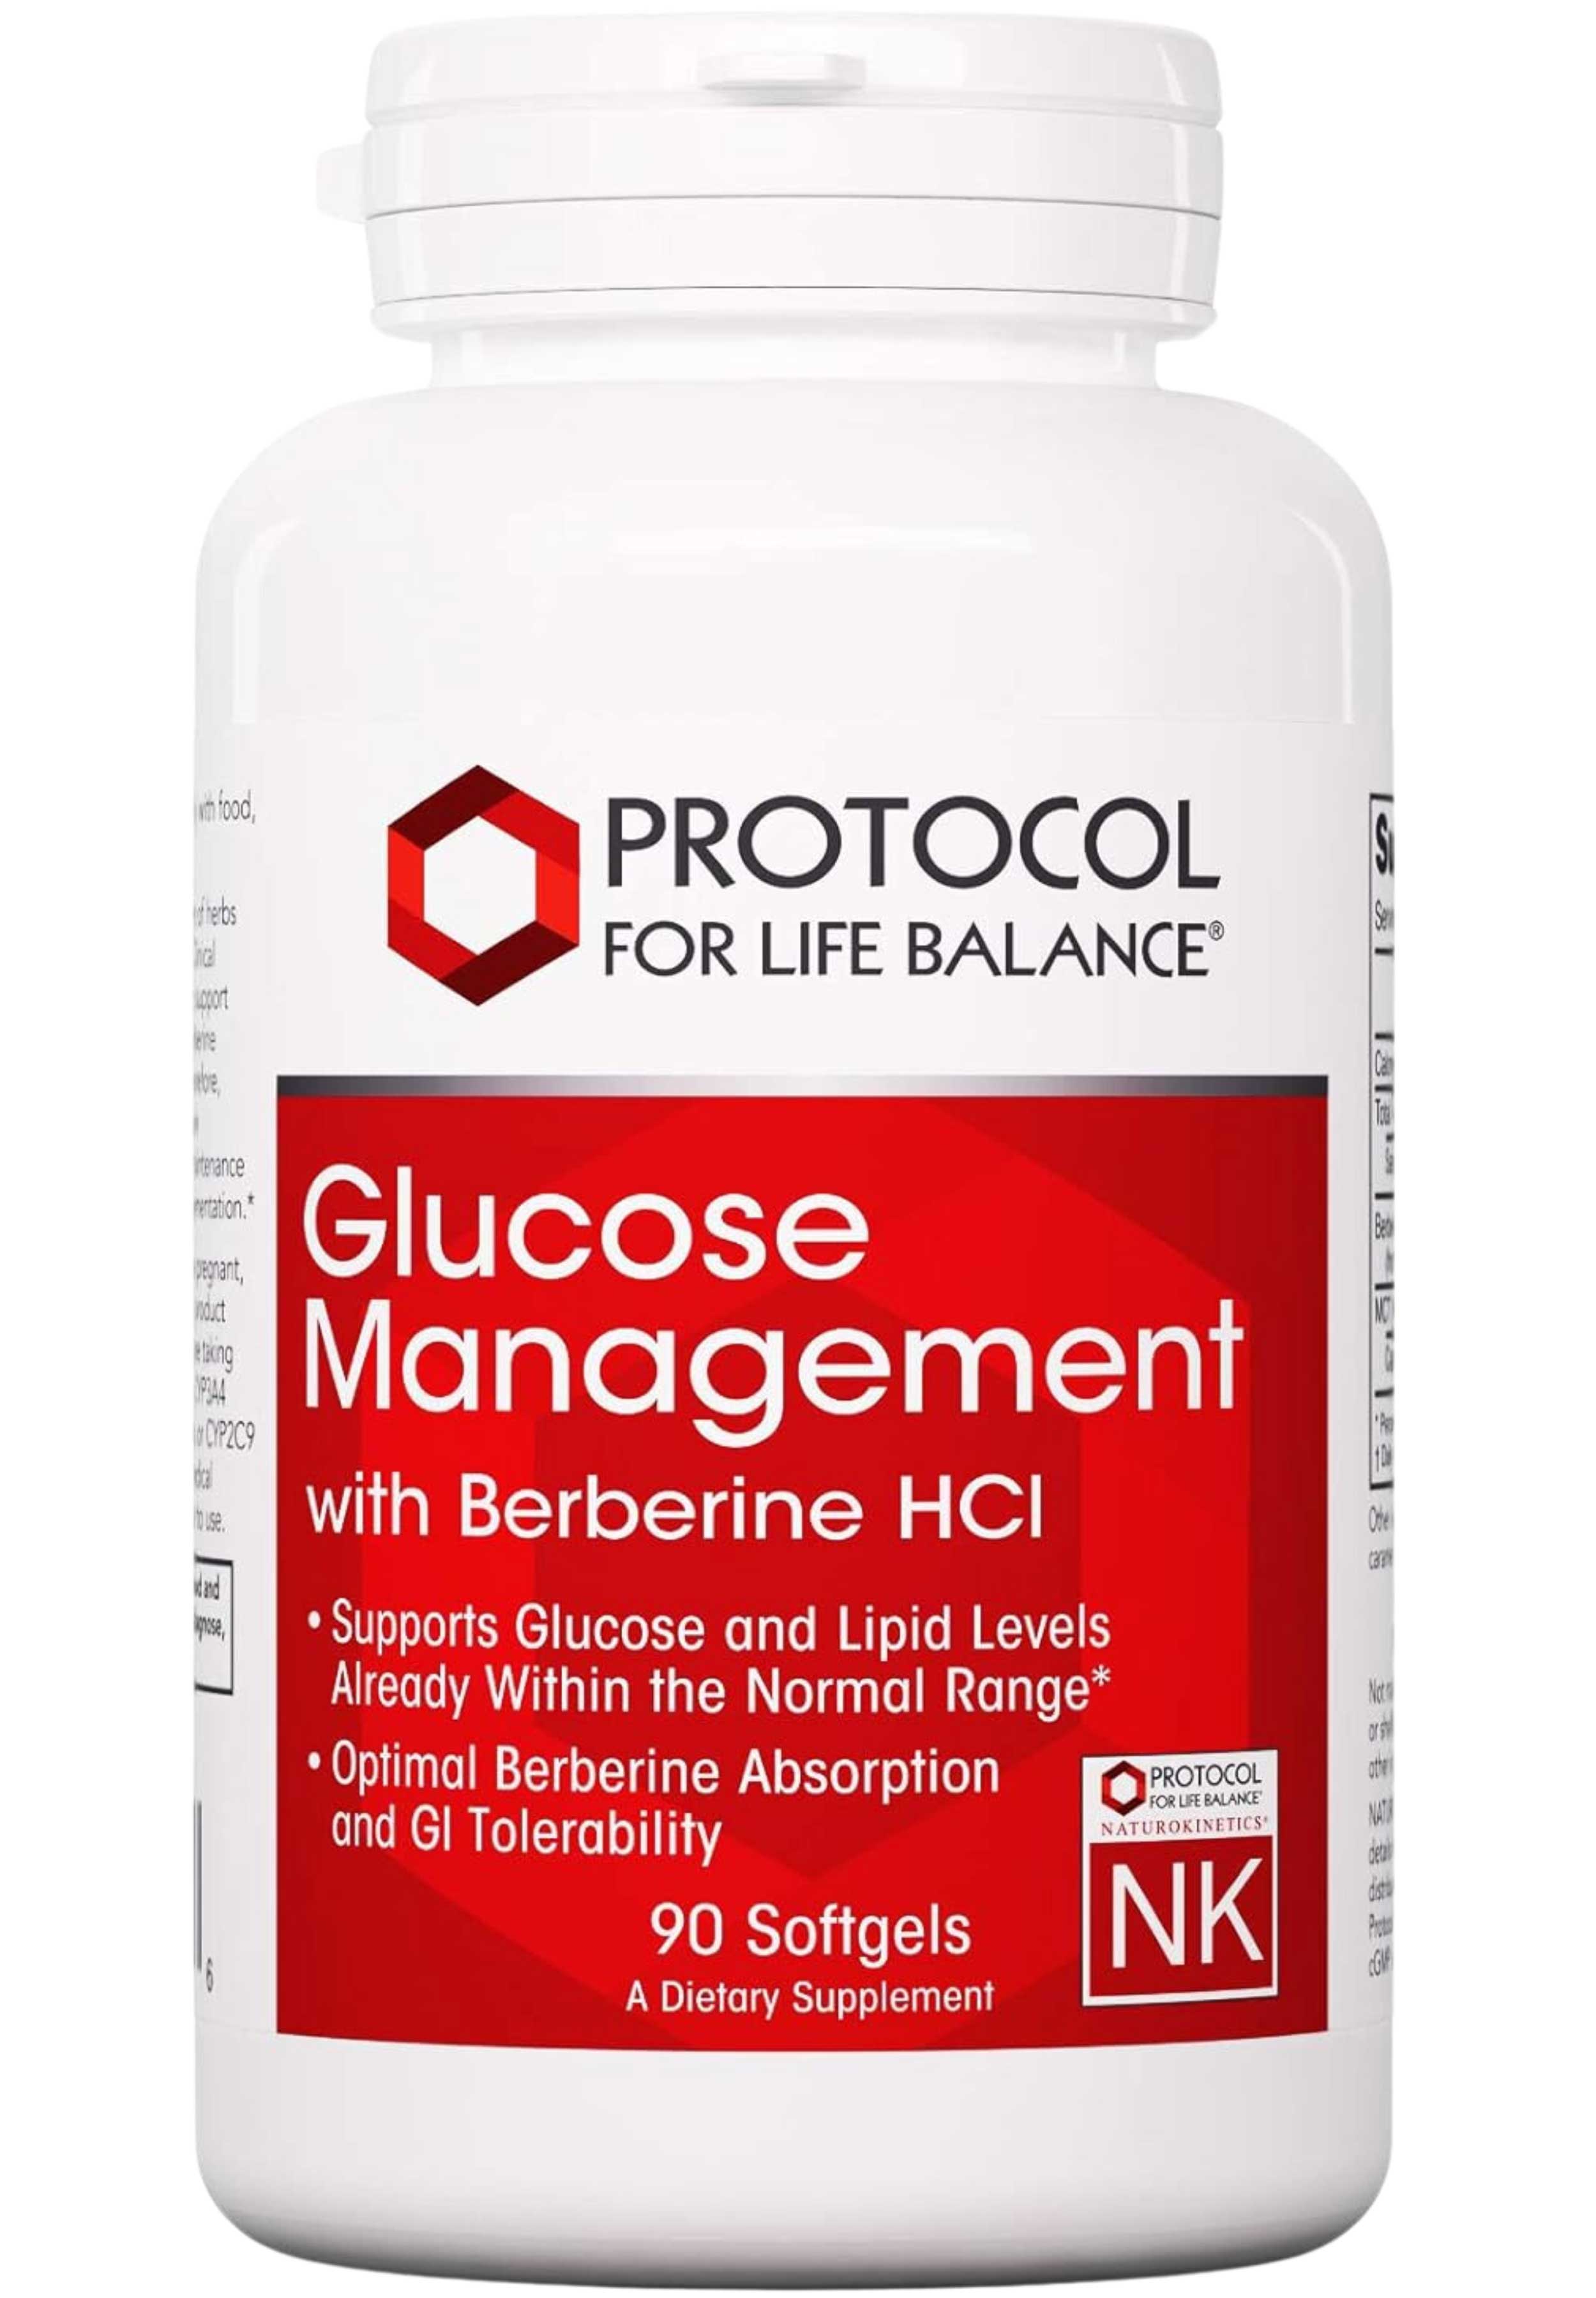 Protocol for Life Balance Glucose Management with Berberine HCl